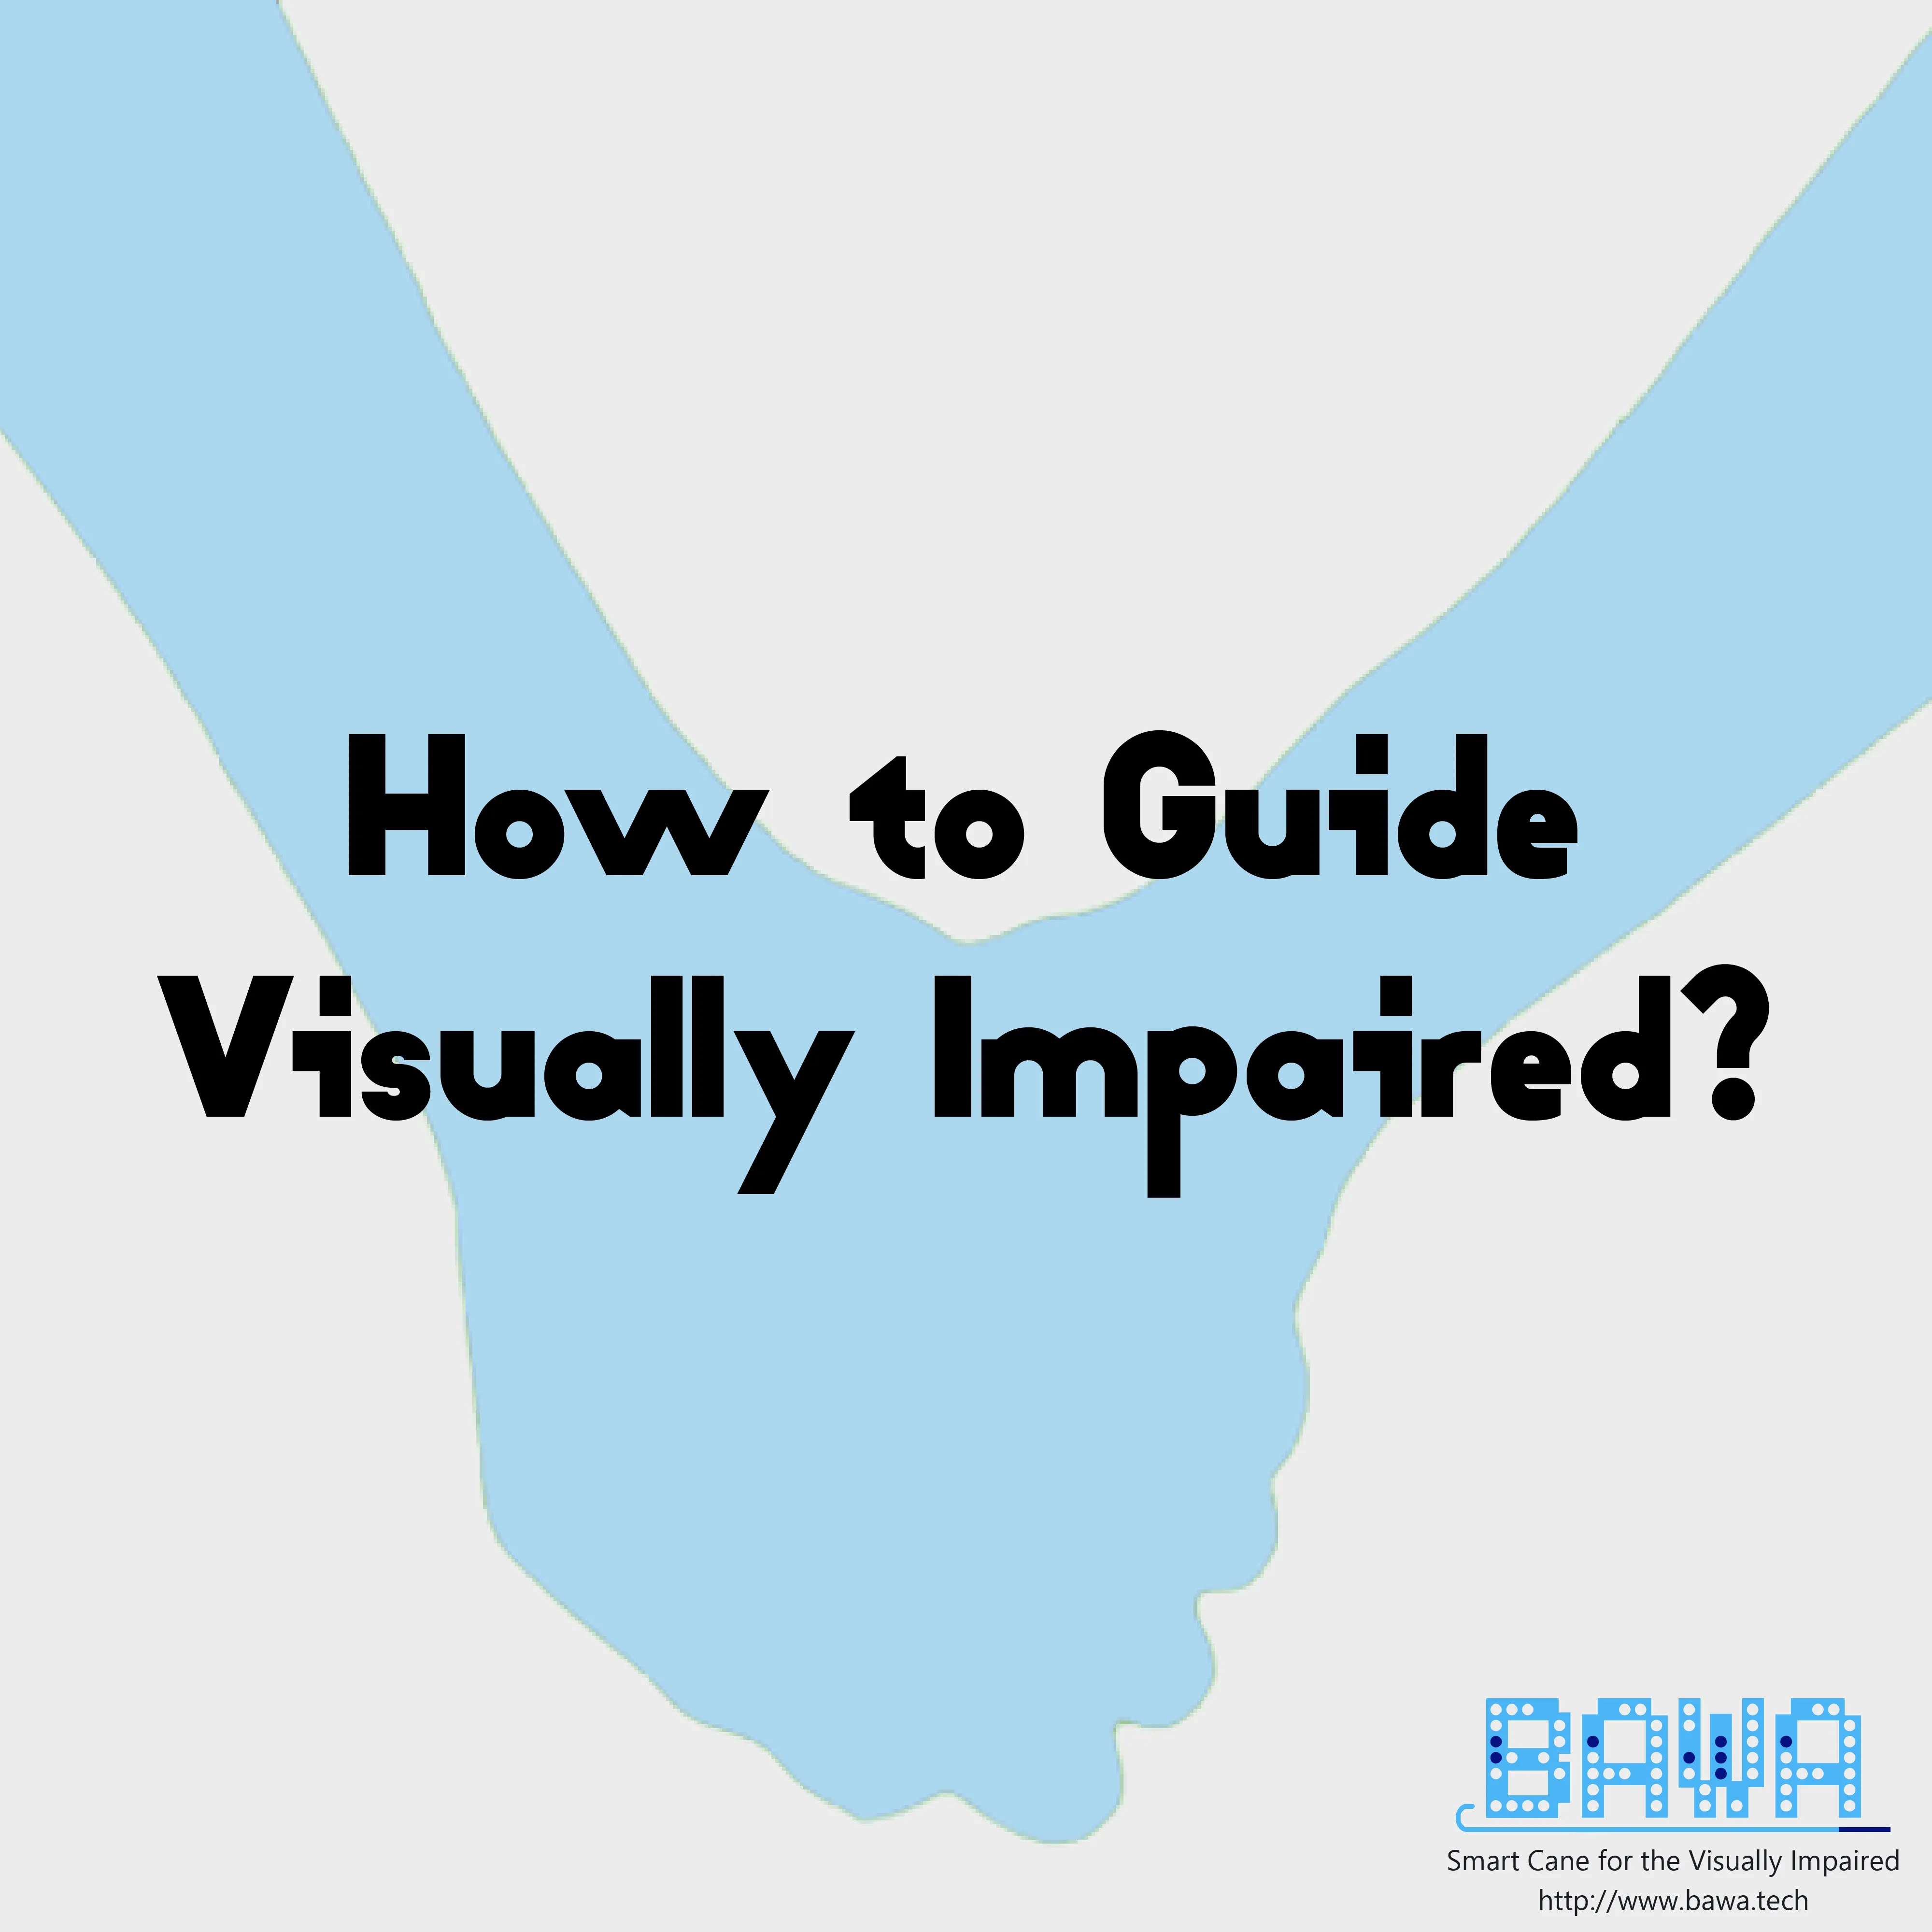 How to Guide a Visually Impaired Person